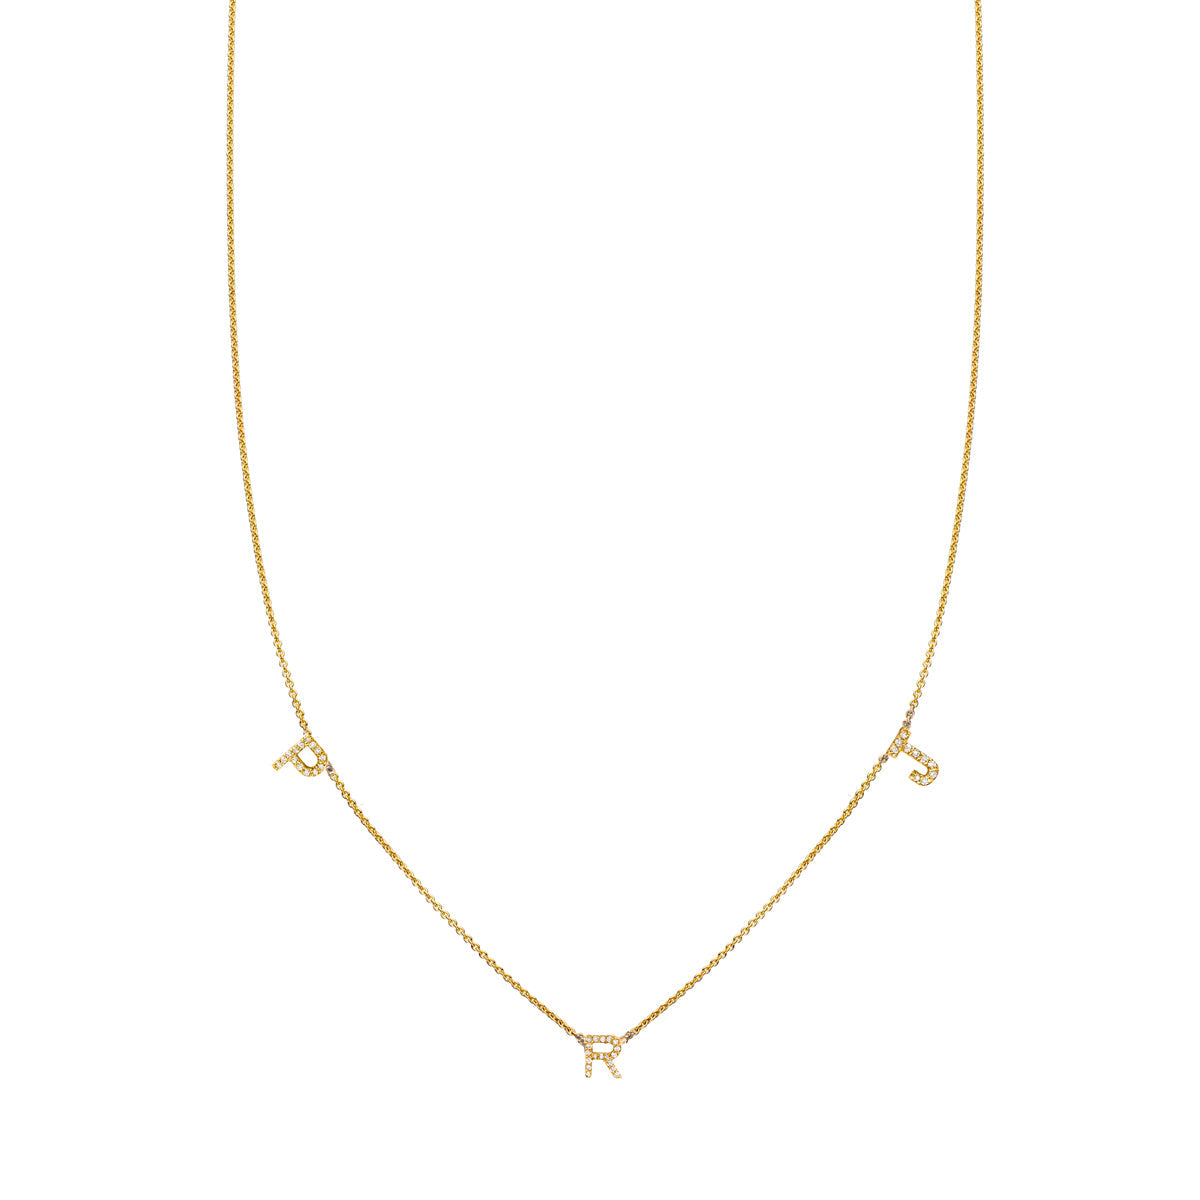 3 letter gold diamond initial necklace PRN 007 03